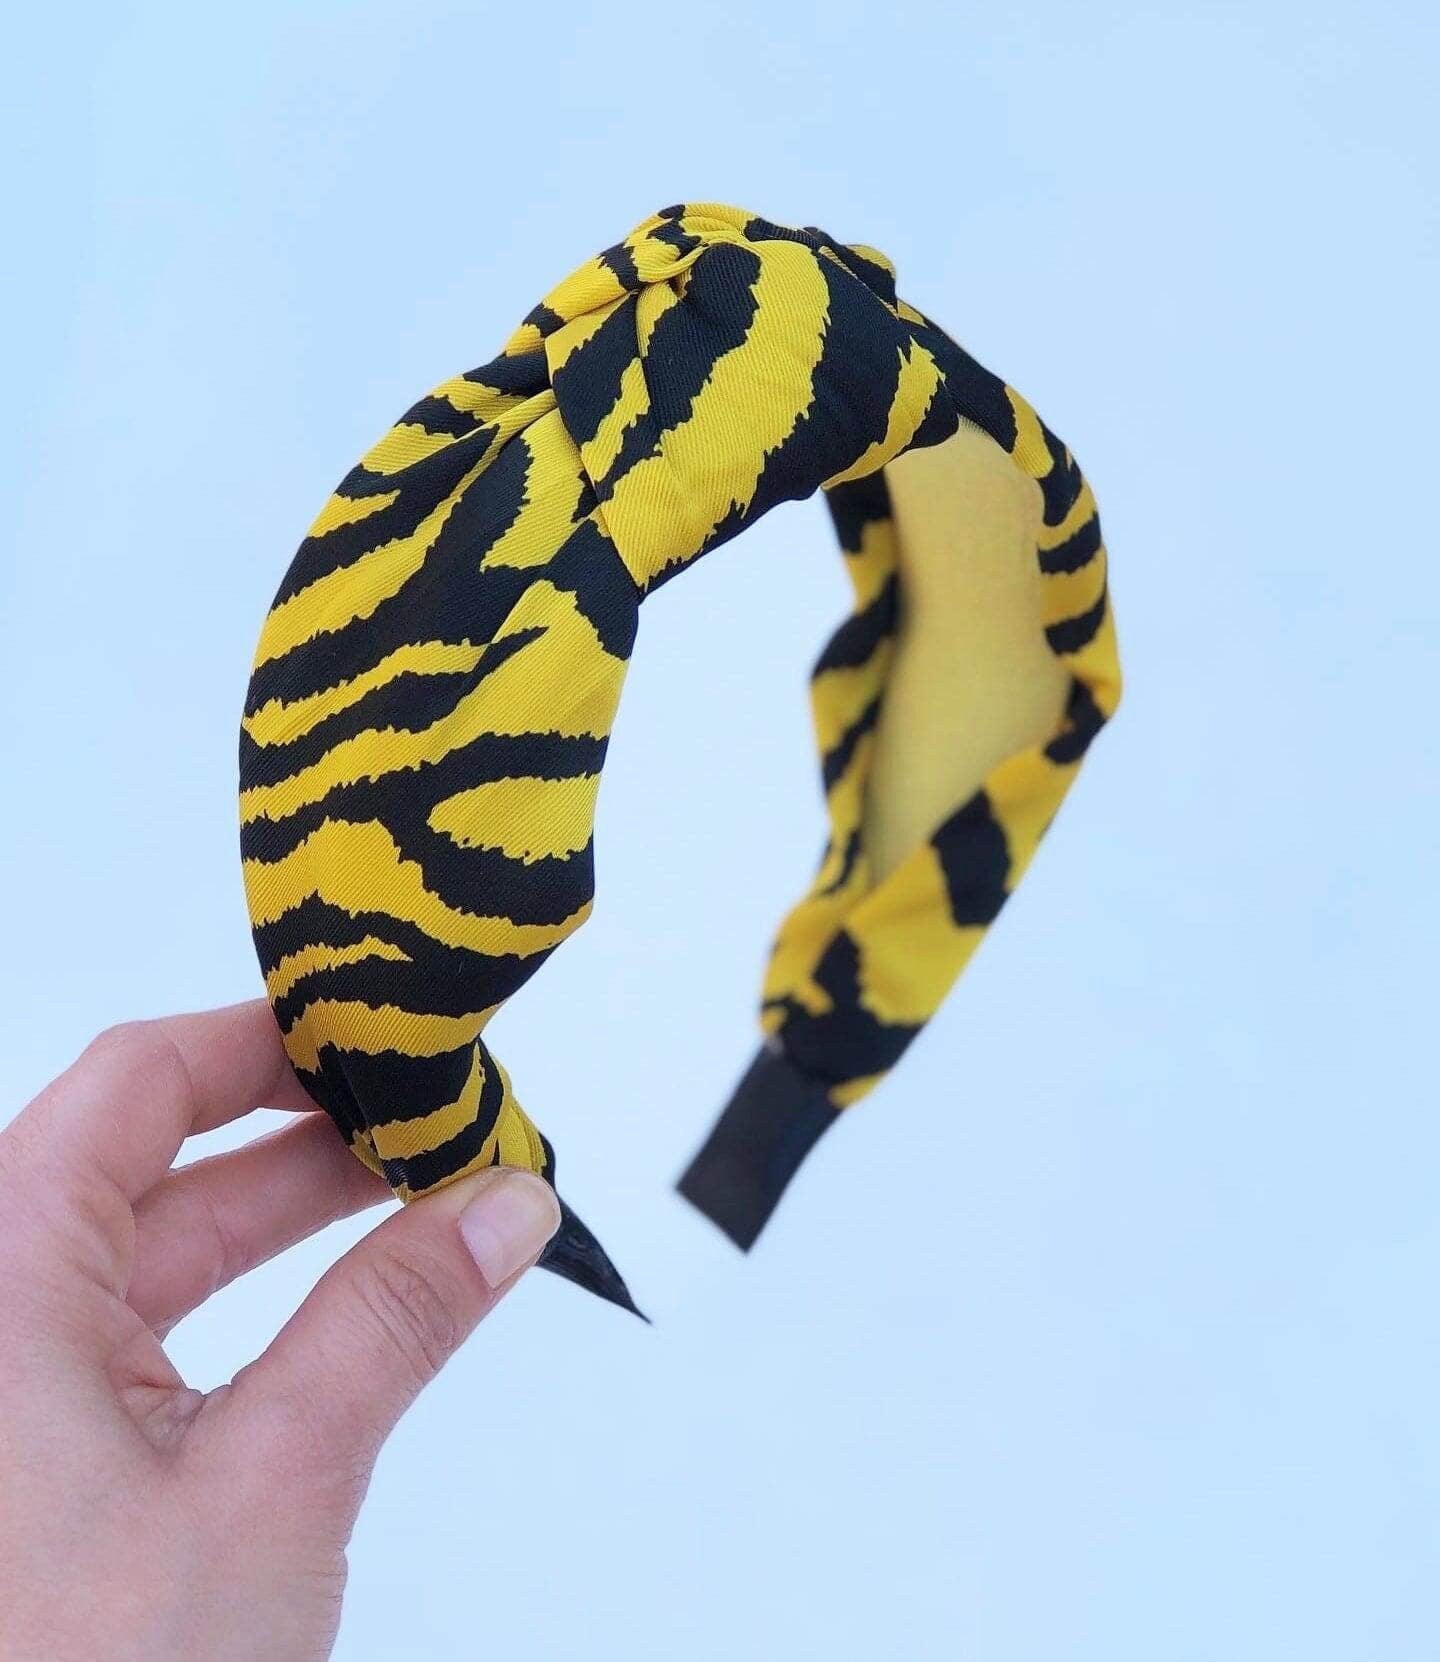 Stylish Knotted Zebra Pattern Headband in Yellow and Black for Women - Padded Alice Band Perfect for Summer